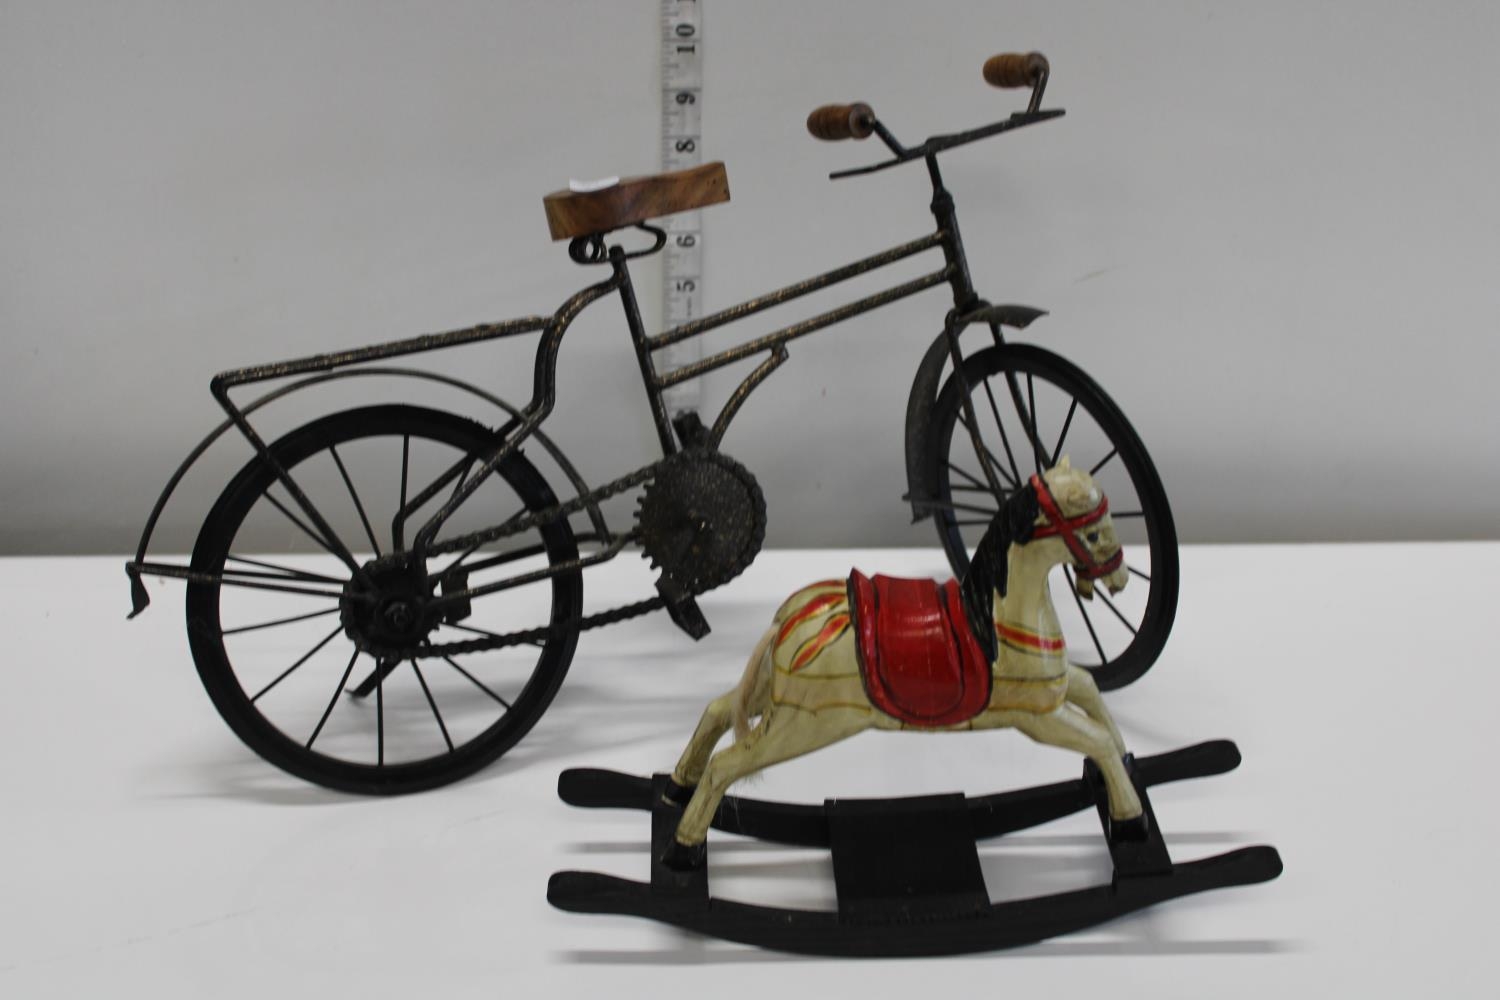 A metal bicycle model and vintage miniature wooden rocking horse